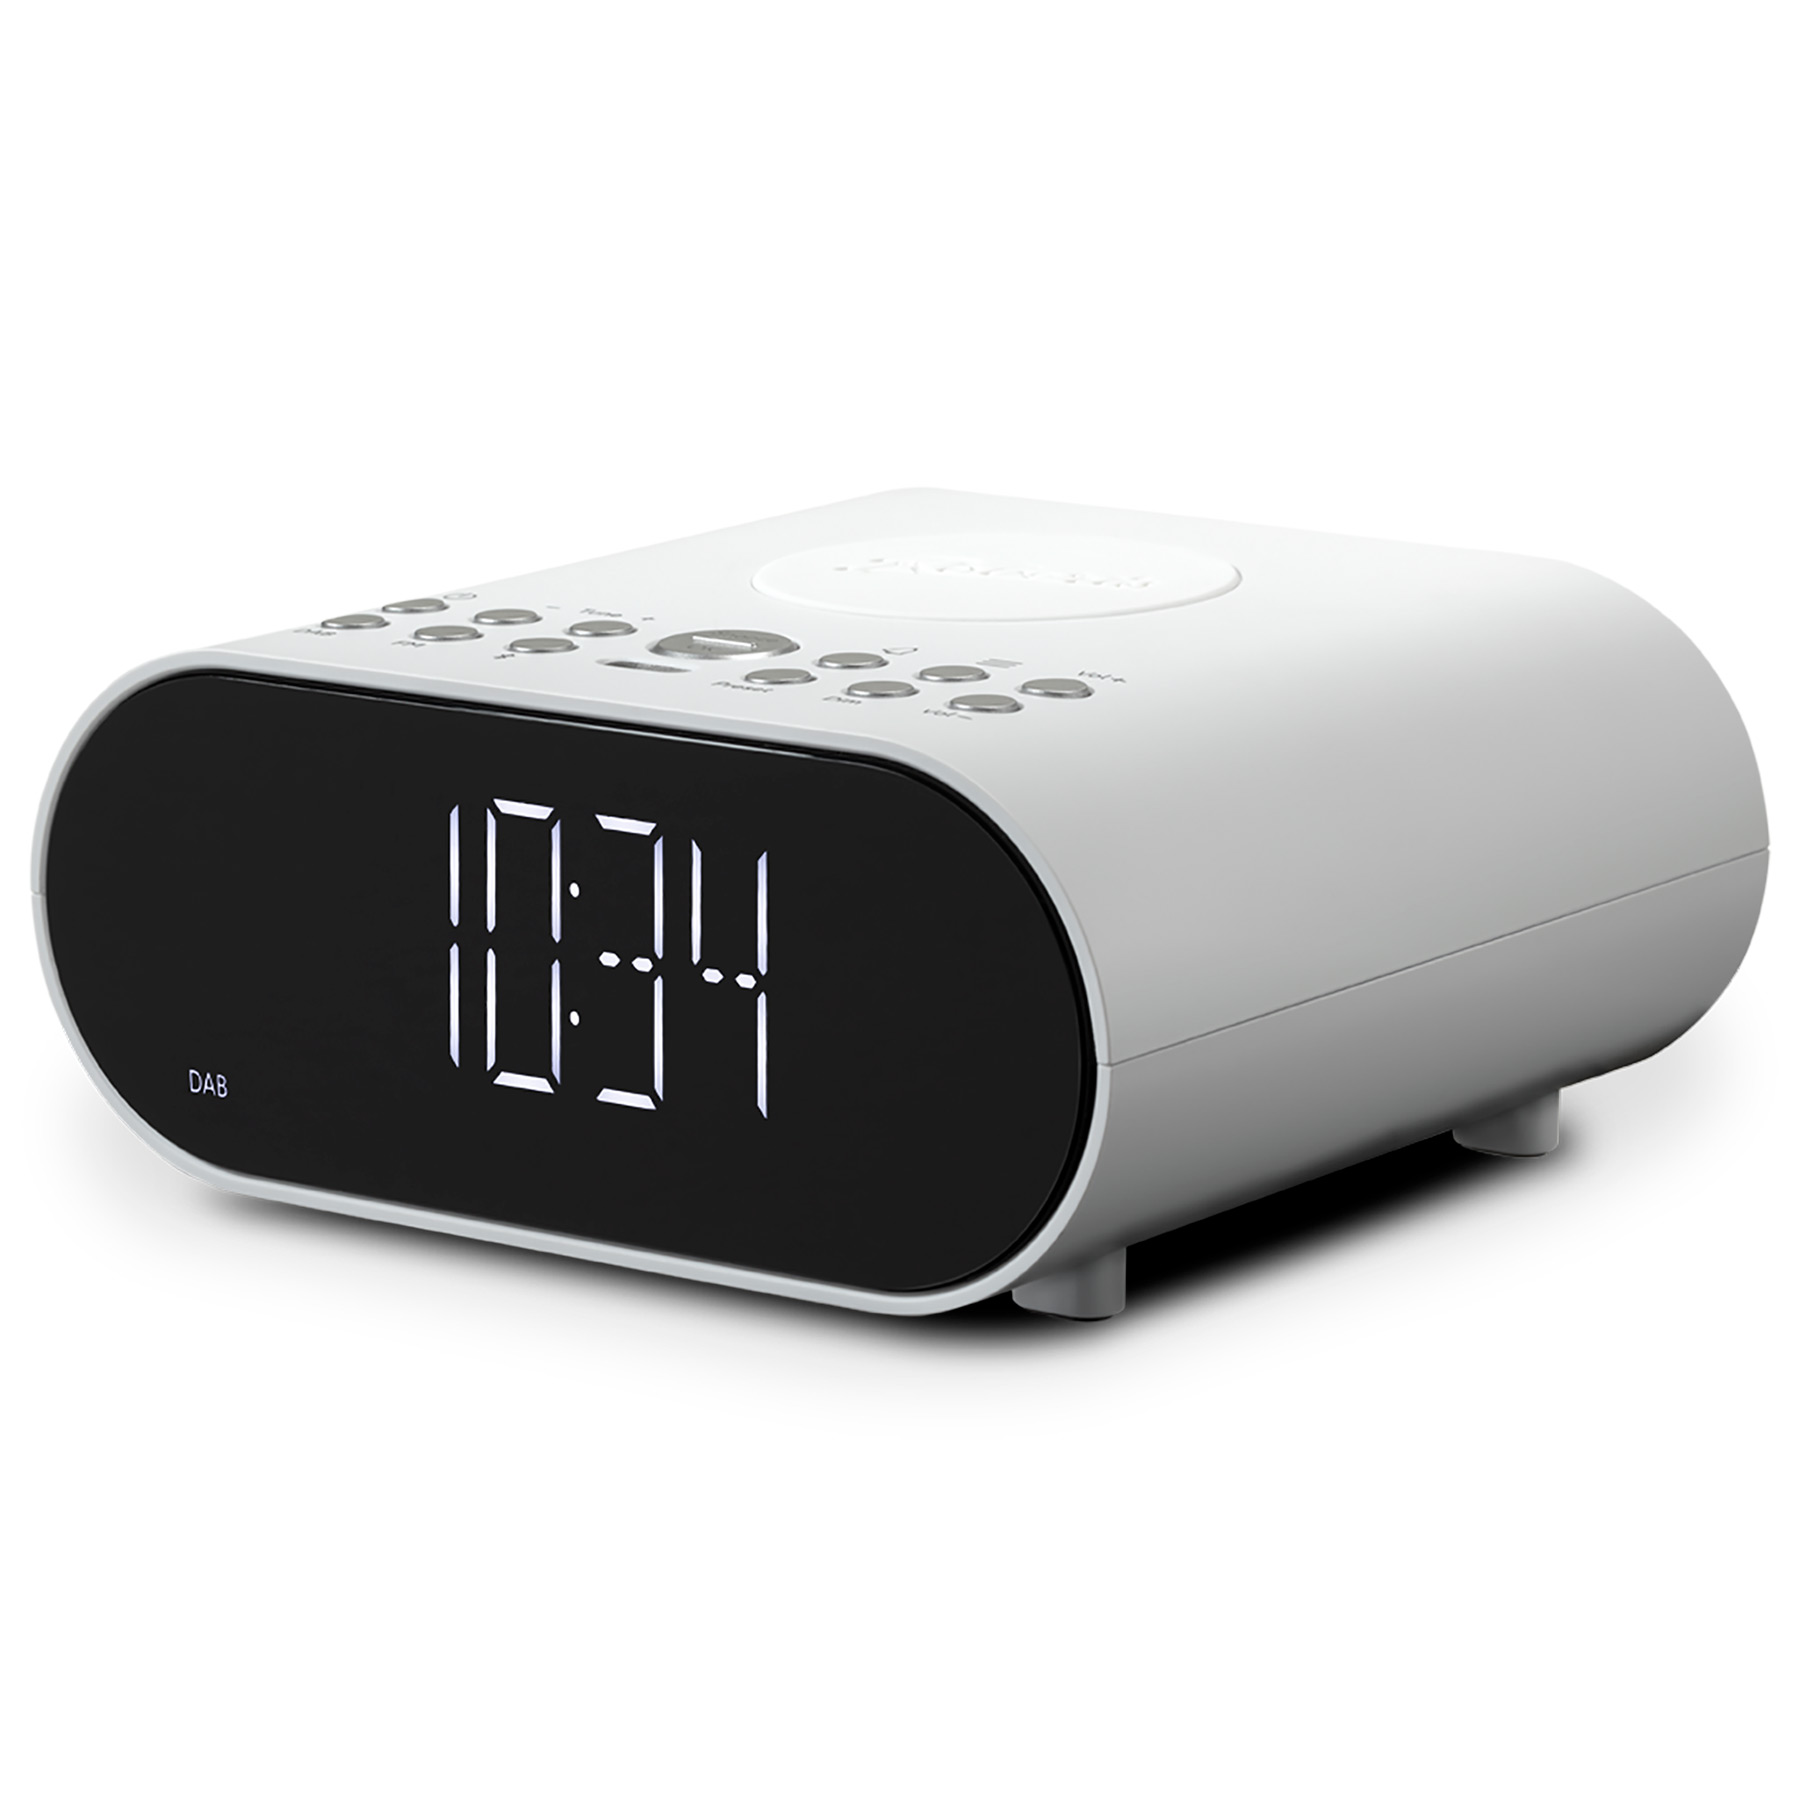 Image of Roberts ORT CHARGEDW Ortus DAB Charge DAB DAB FM BT Clock Radio in Whi